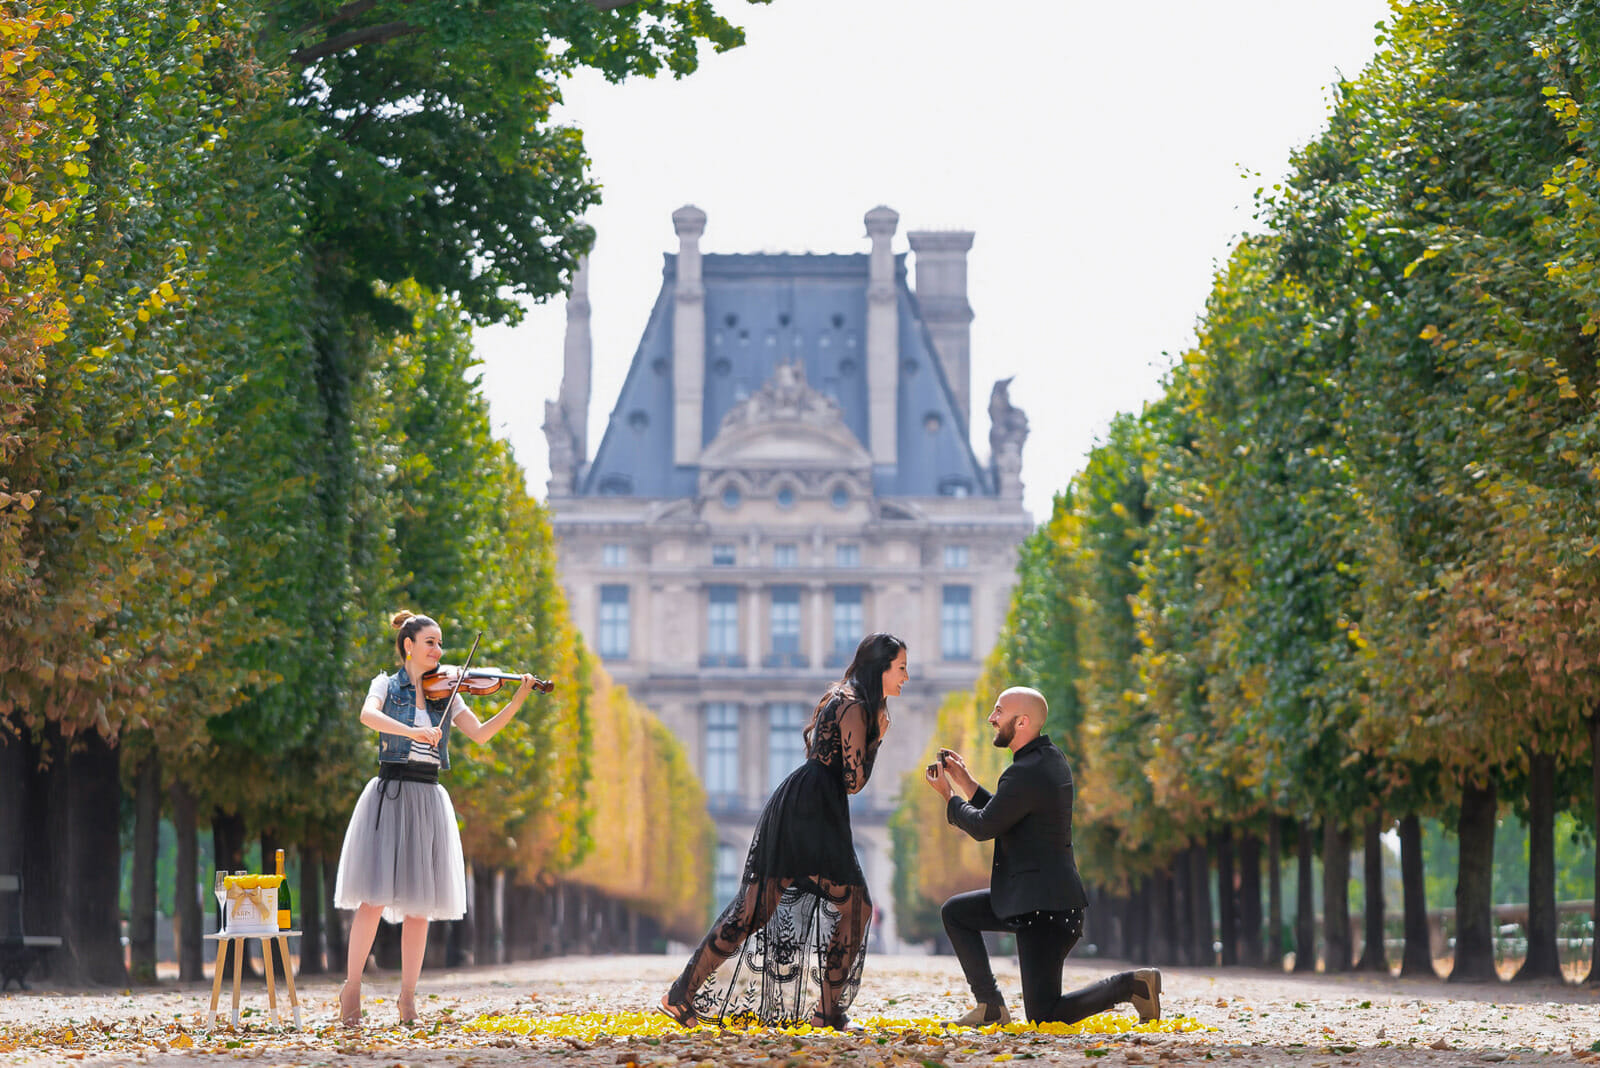 Private marriage proposal in the Tuileries Garden with a violinist, flowers and chilled Champagne